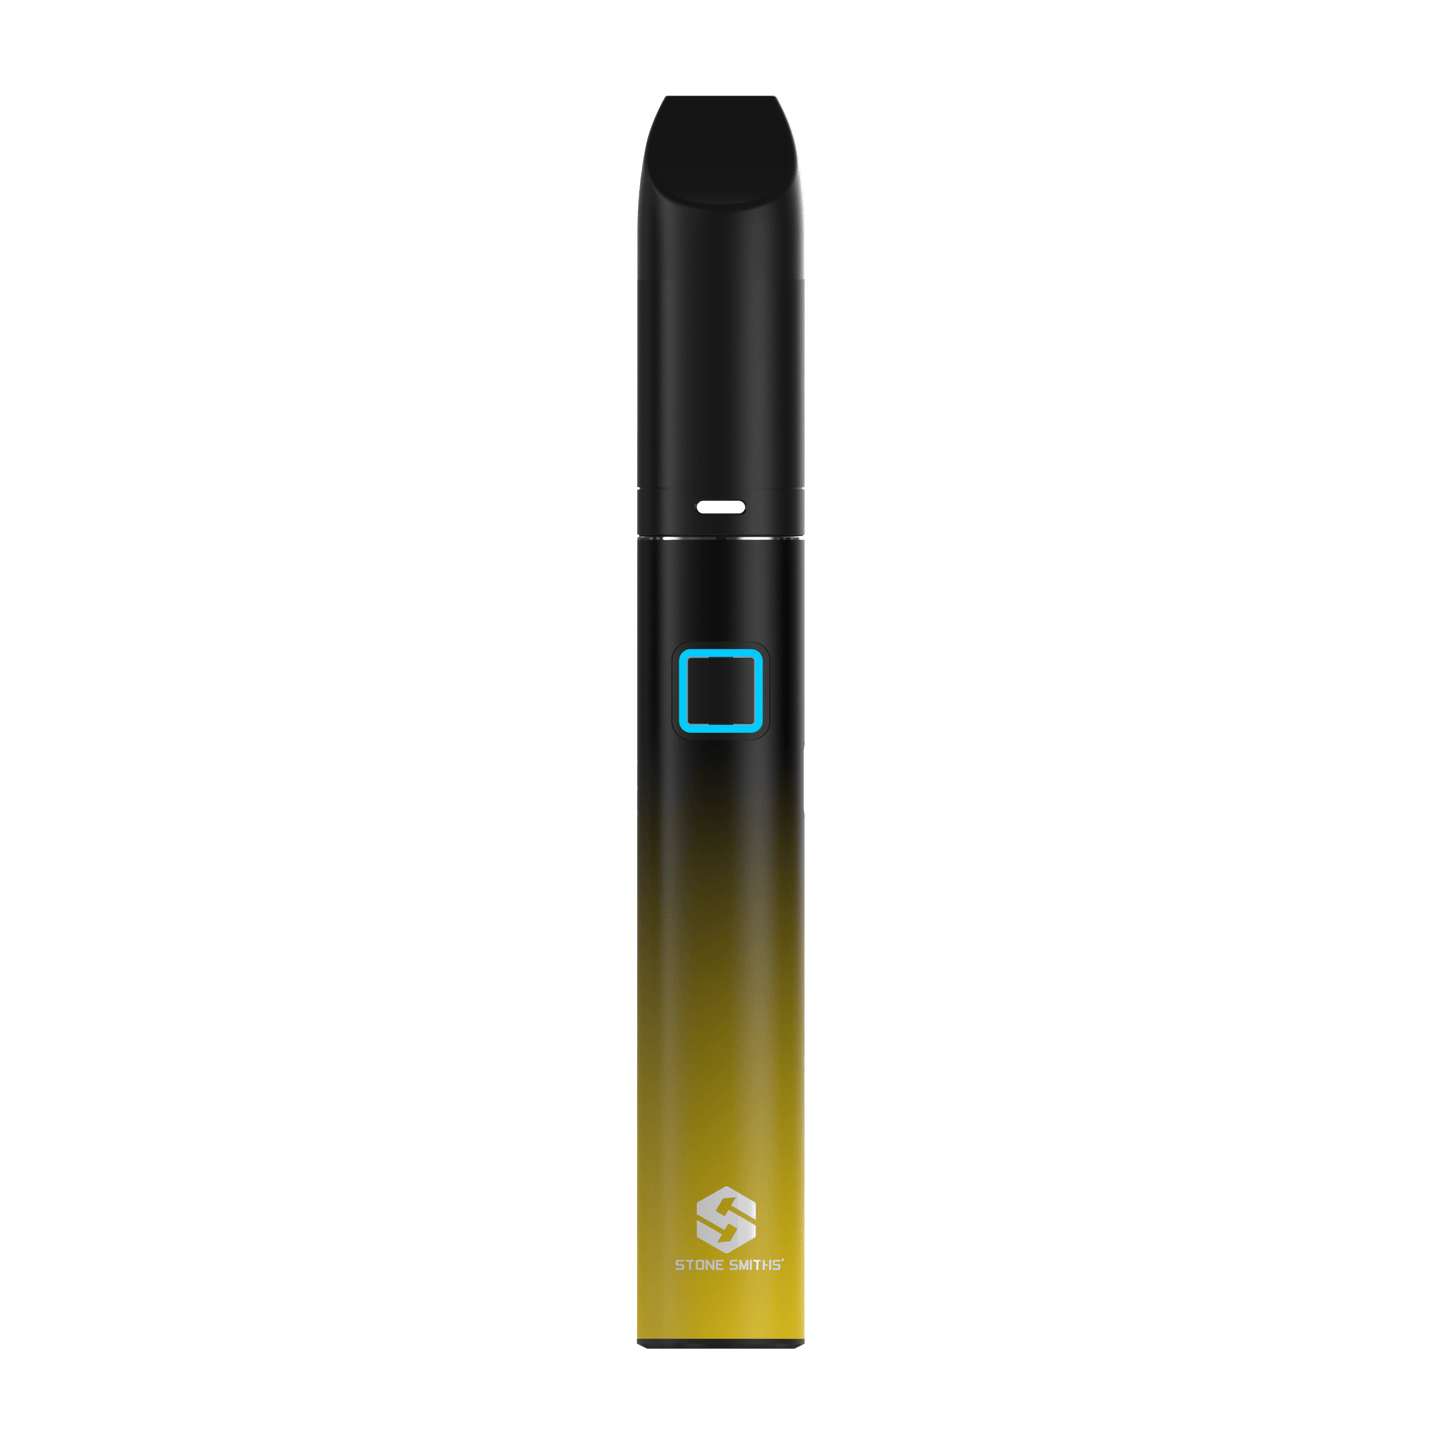 
                  
                    Stonesmiths' Device Bumblebee - Yellow Piccolo Concentrate Vape Pen (Shipping on Oct 20~25) Approx. 45.6 USD
                  
                